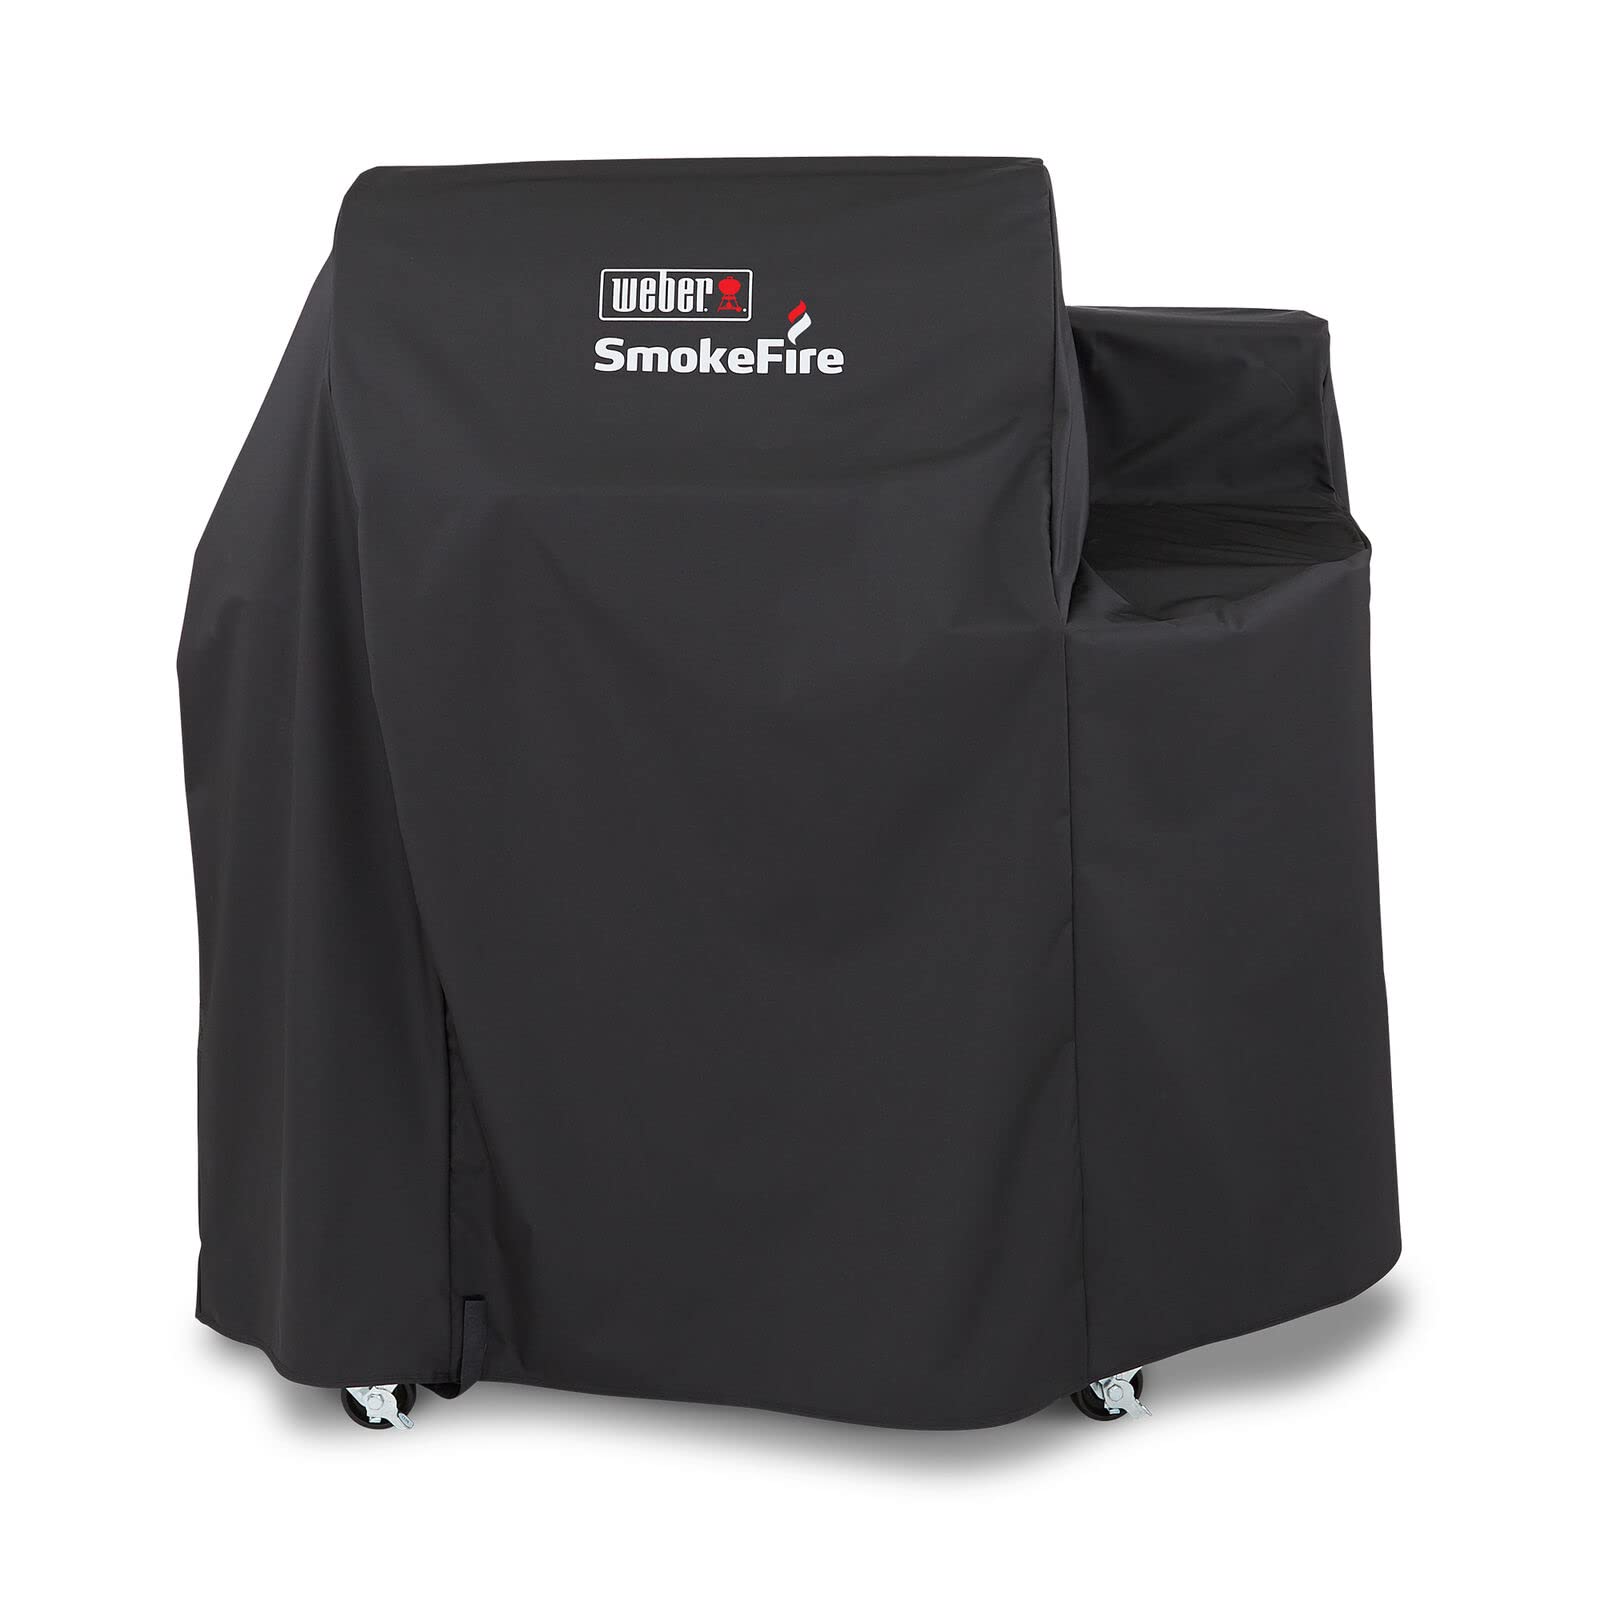 24" Weber SmokeFire EX4 Wood Pellet Premium Grill Cover $35.86 + Free Shipping